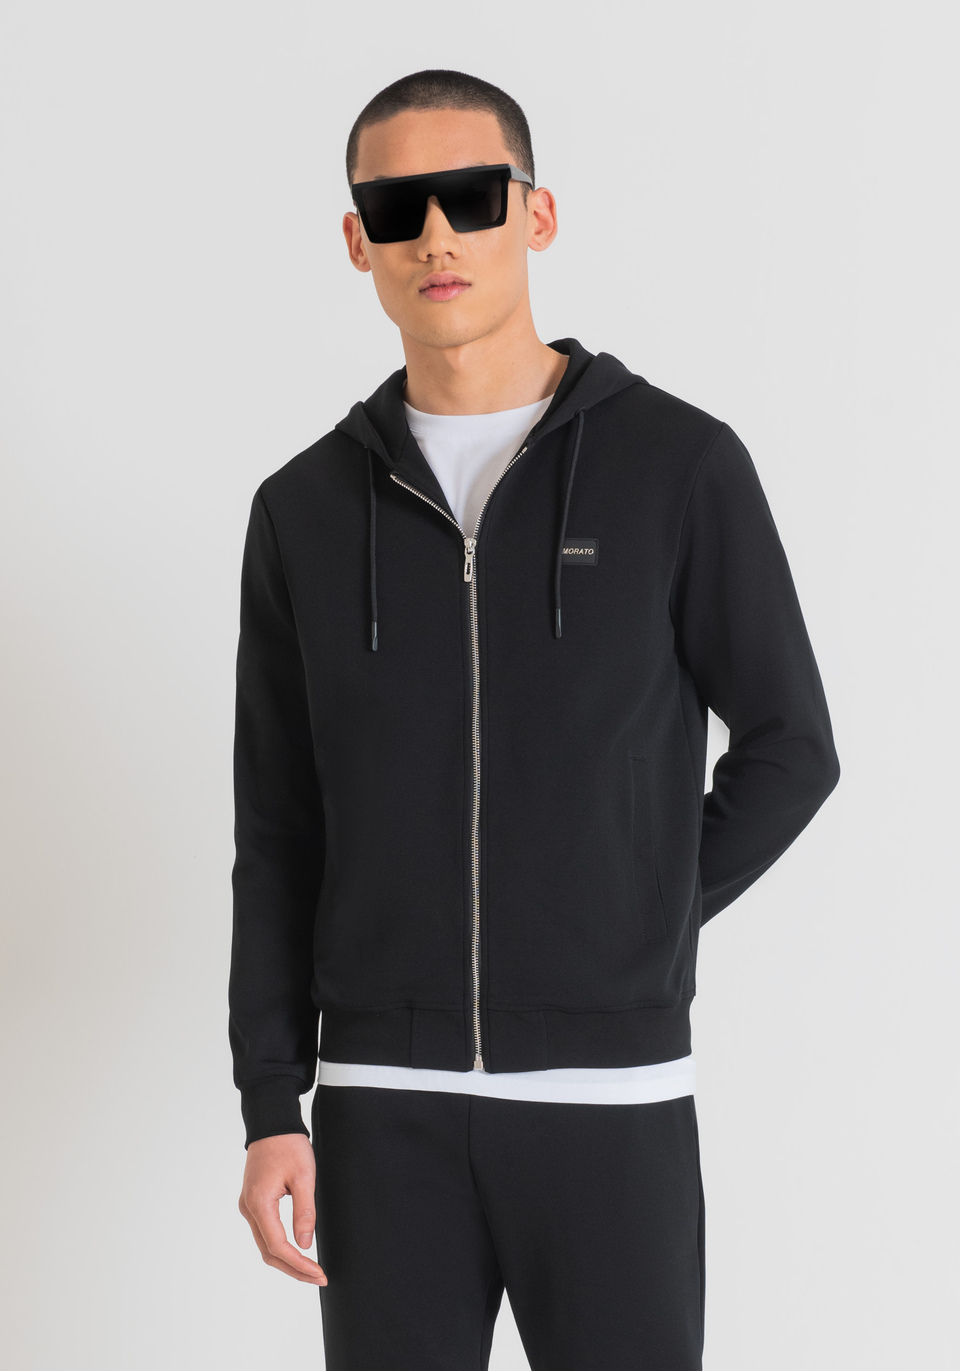 SLIM FIT SWEATSHIRT IN COTTON BLEND FABRIC WITH METAL LOGO PLAQUE WITH RUBBER BASE - Antony Morato Online Shop